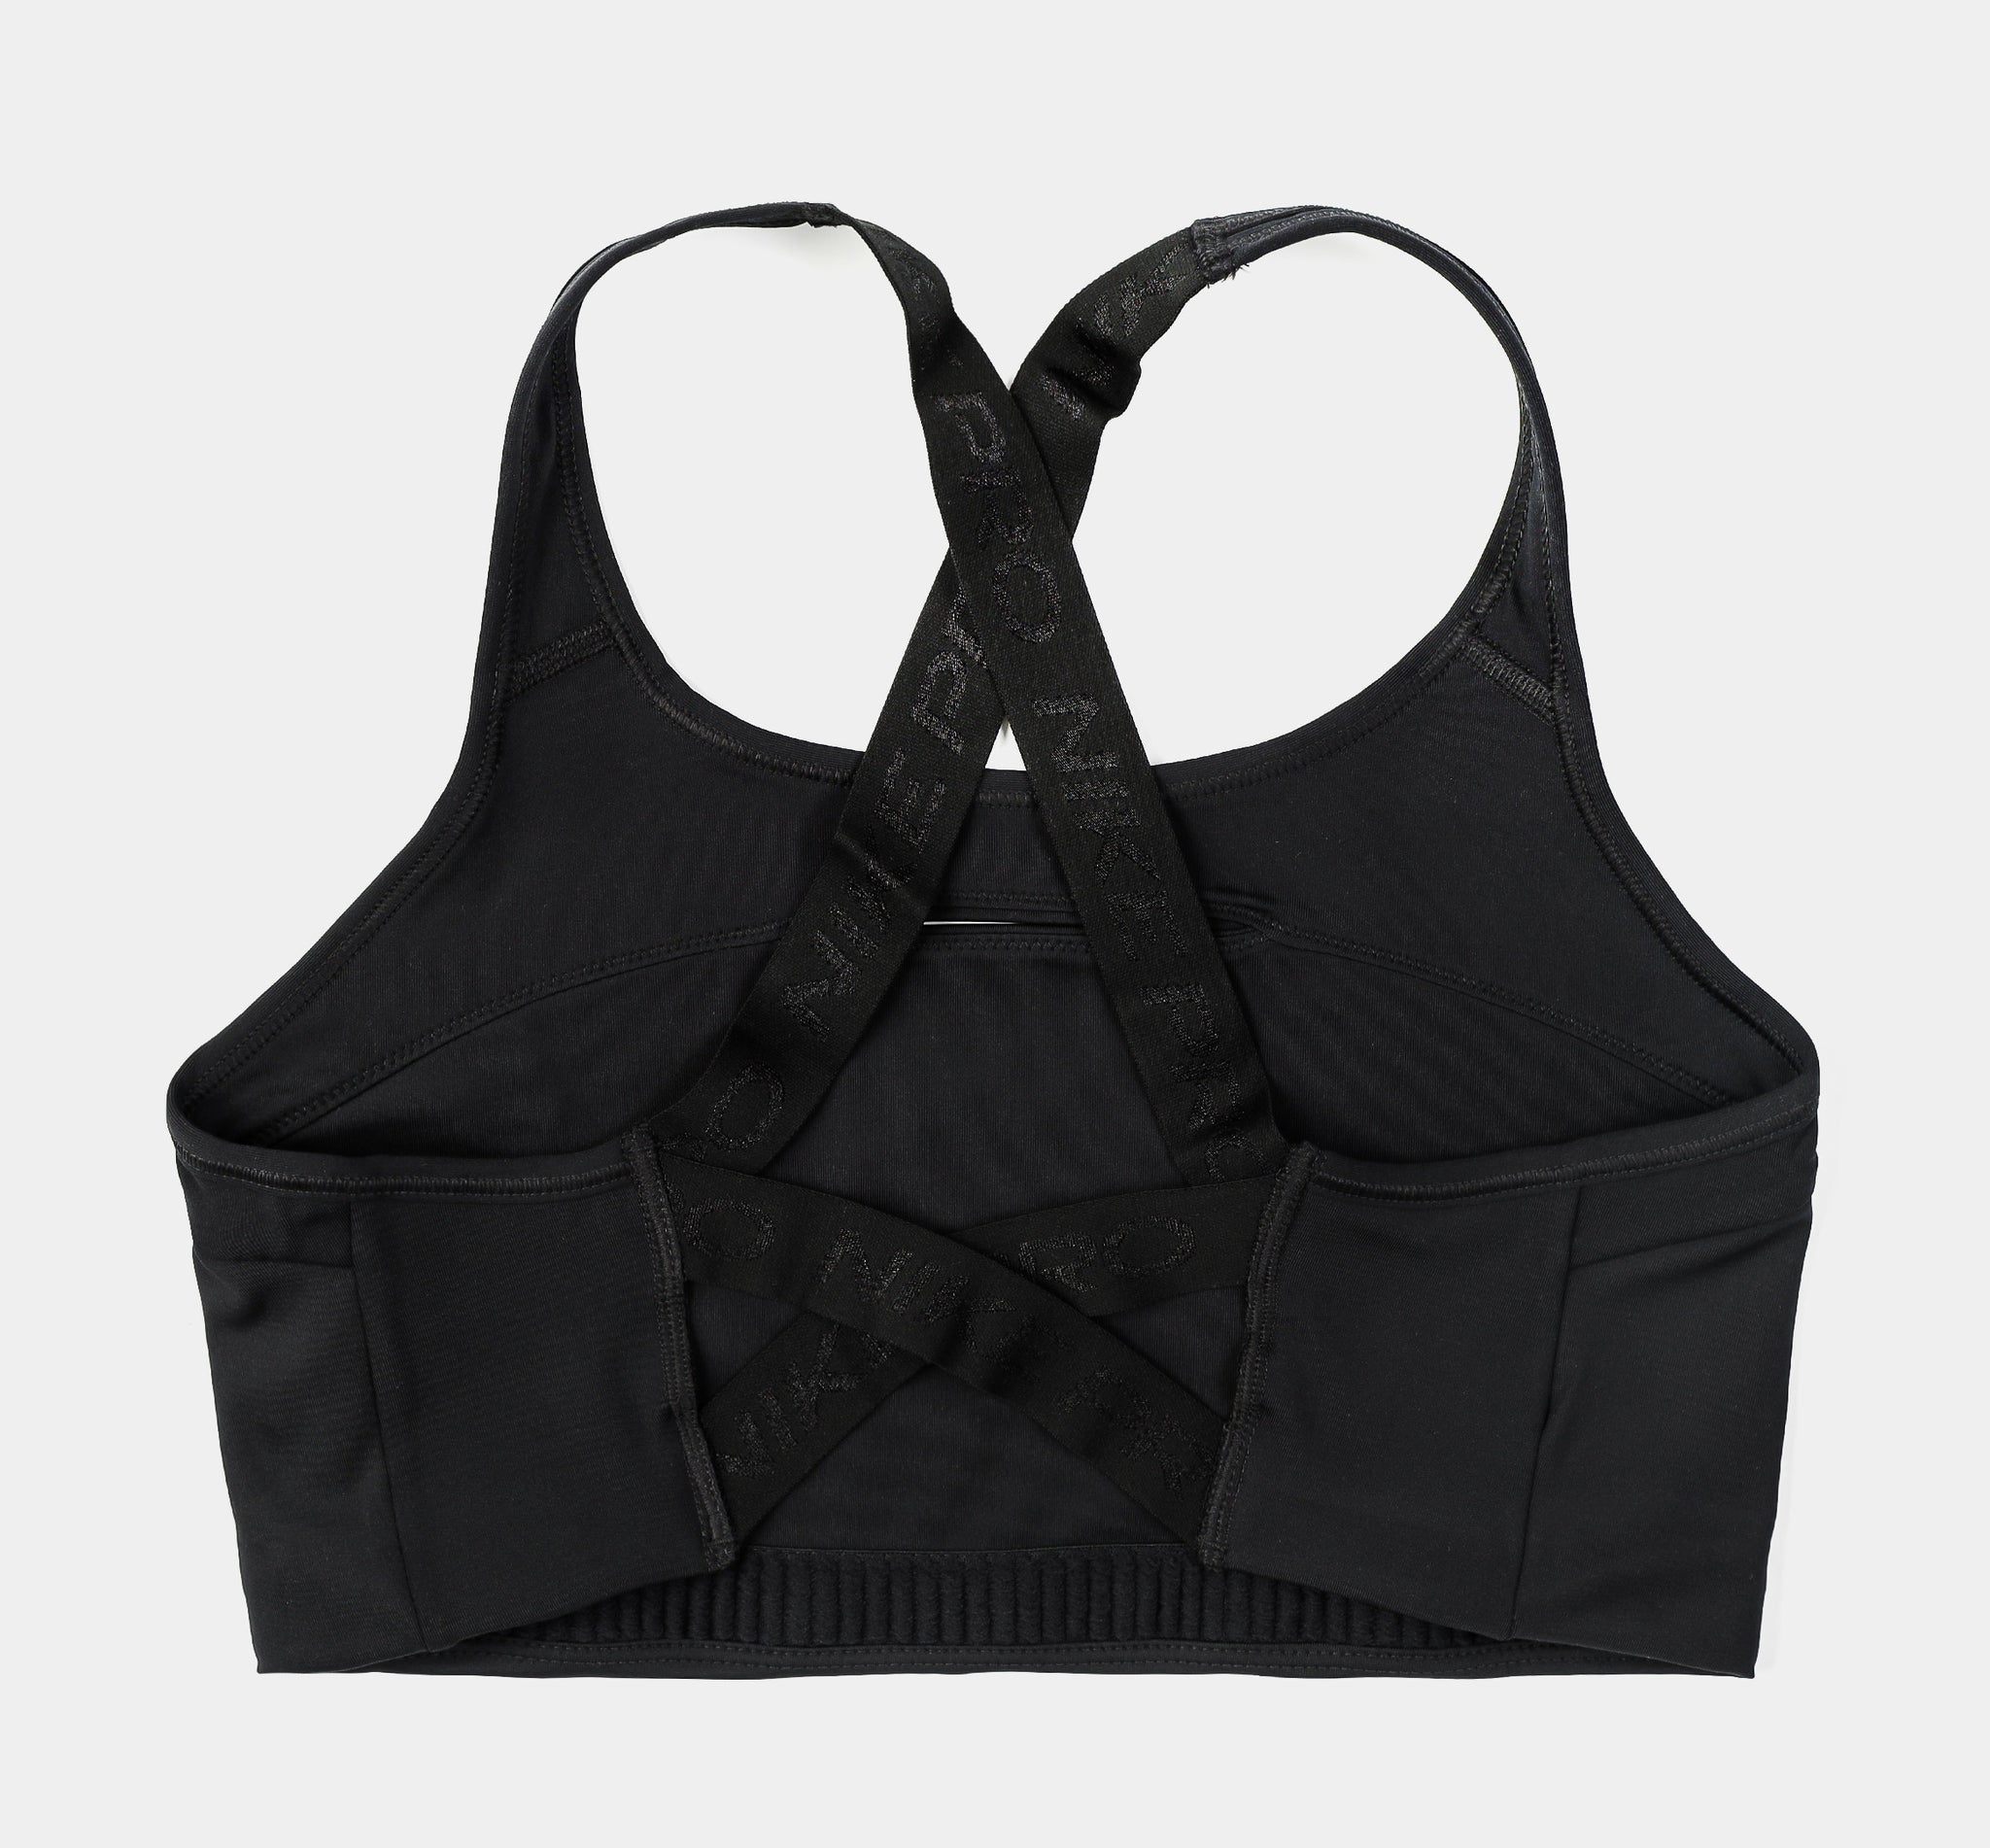 Shop Nike Sport Bras with great discounts and prices online - Jan